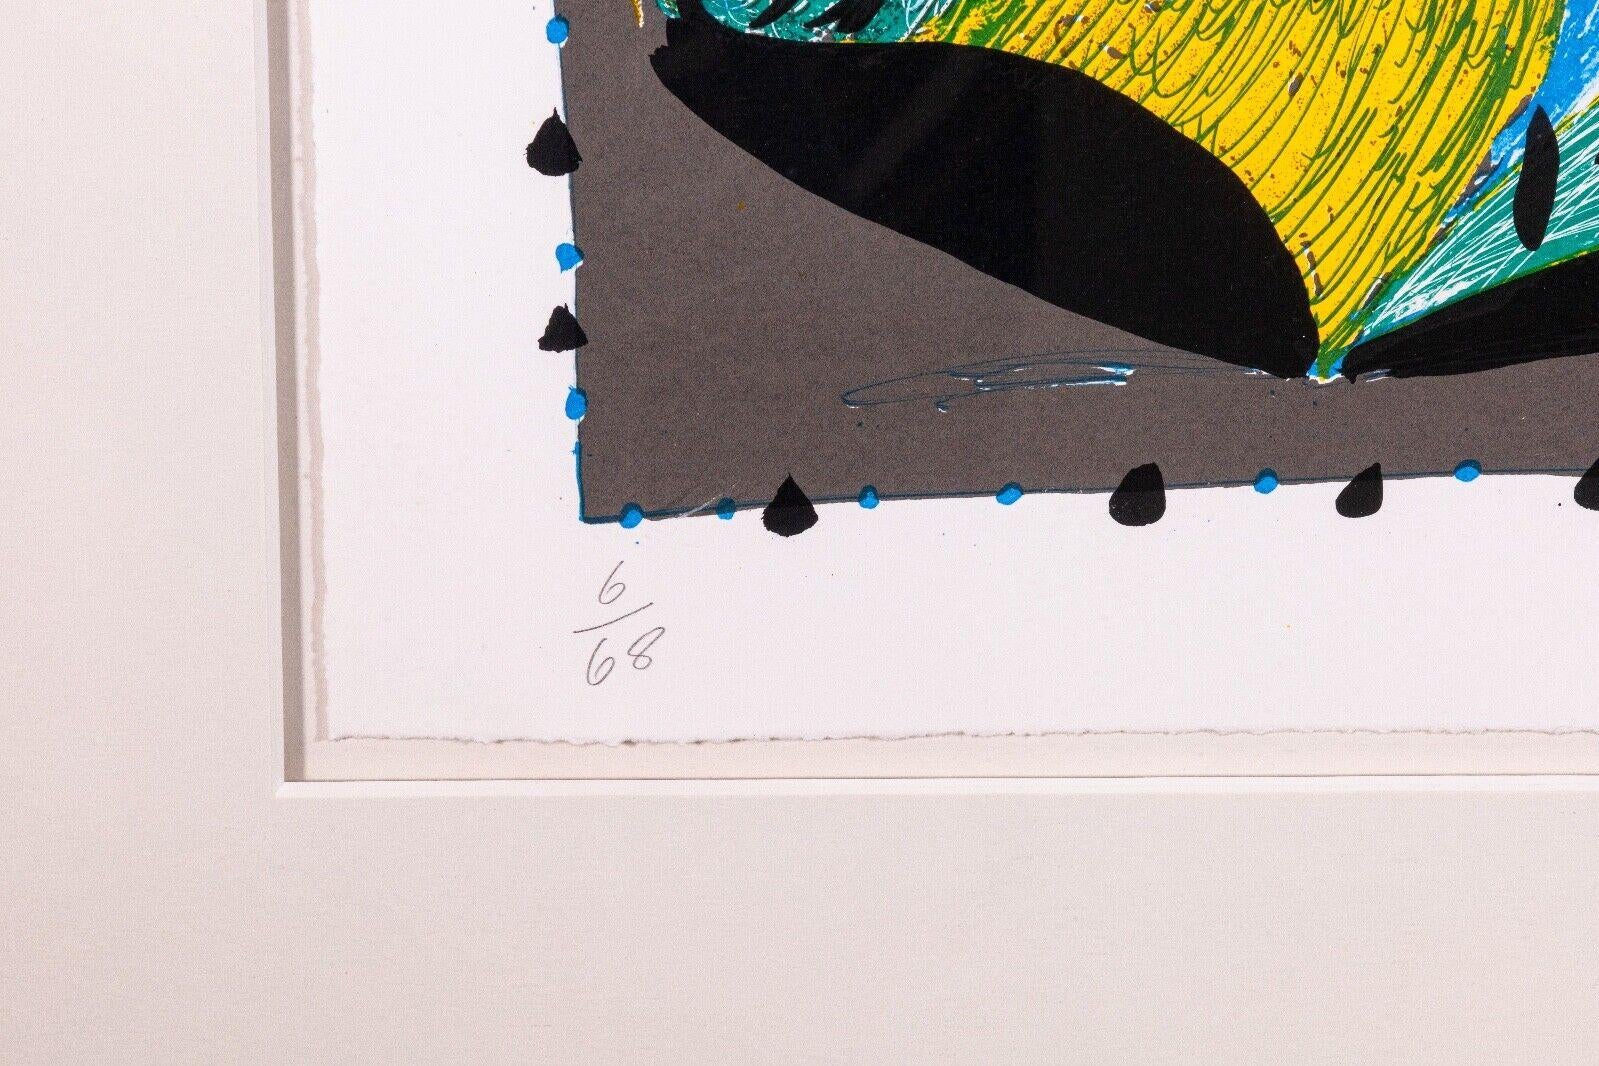 David Hockney Warm Start, from Some New Prints Lithograph & Screenprint 6/68 In Good Condition For Sale In Keego Harbor, MI